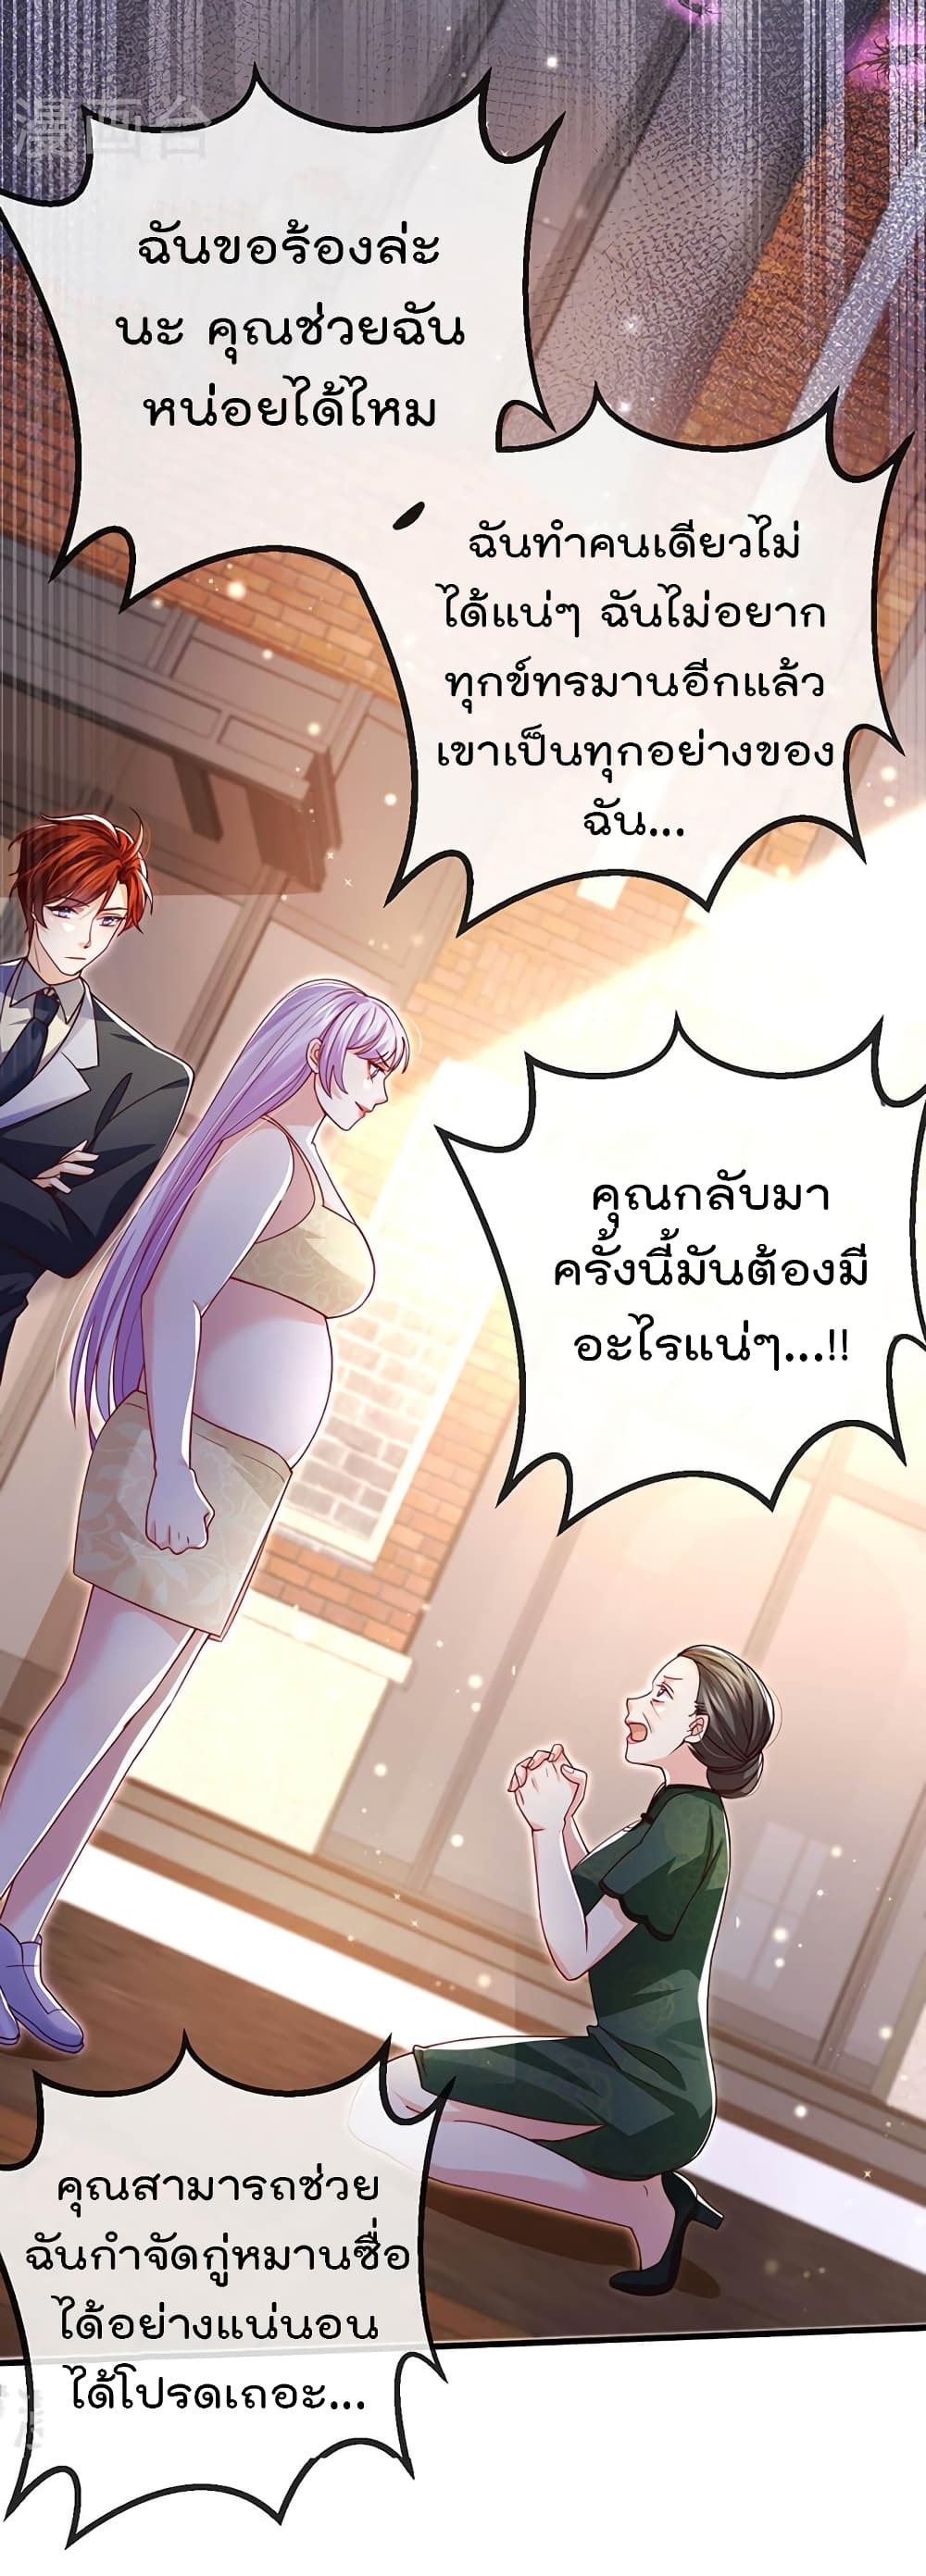 One Hundred Ways to Abuse Scum ตอนที่ 81 (9)